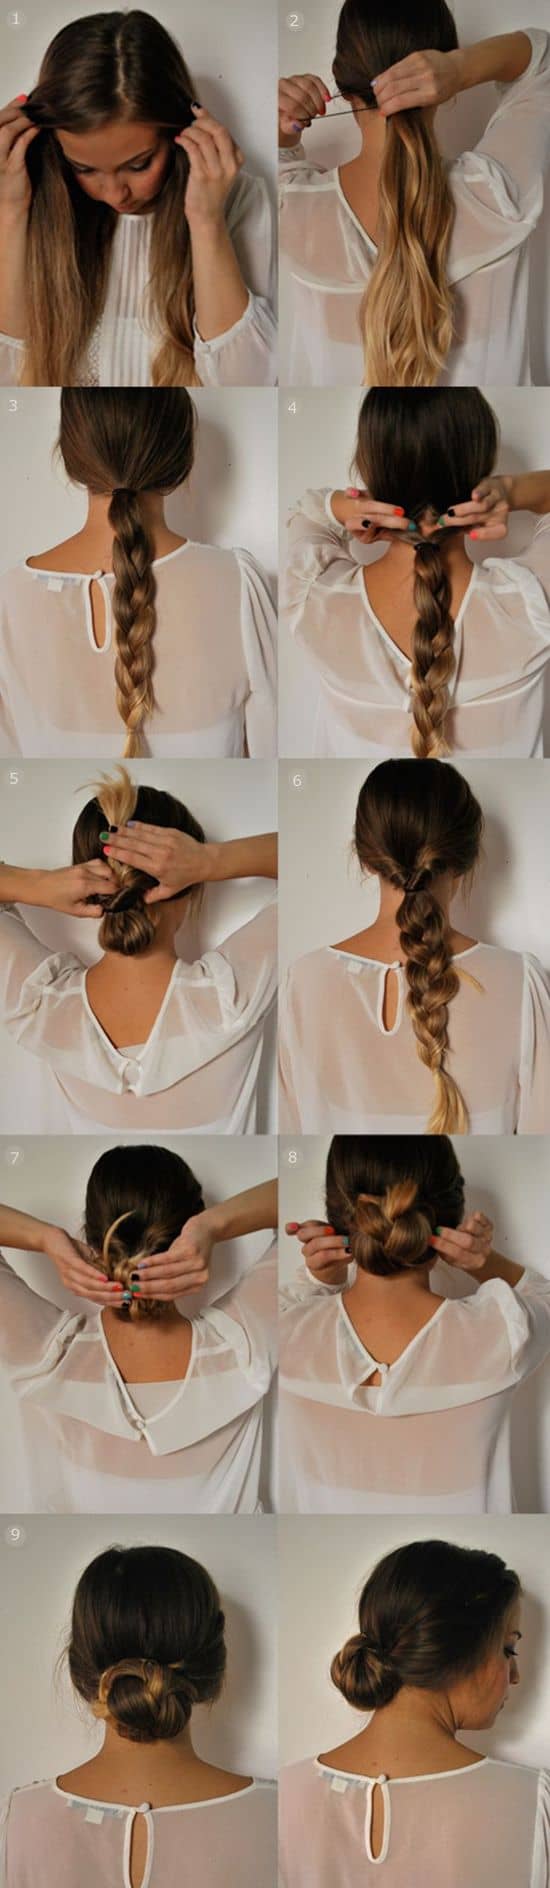 Awesome Hairstyle Tutorials That You Can Do In Less Than 5 Minutes